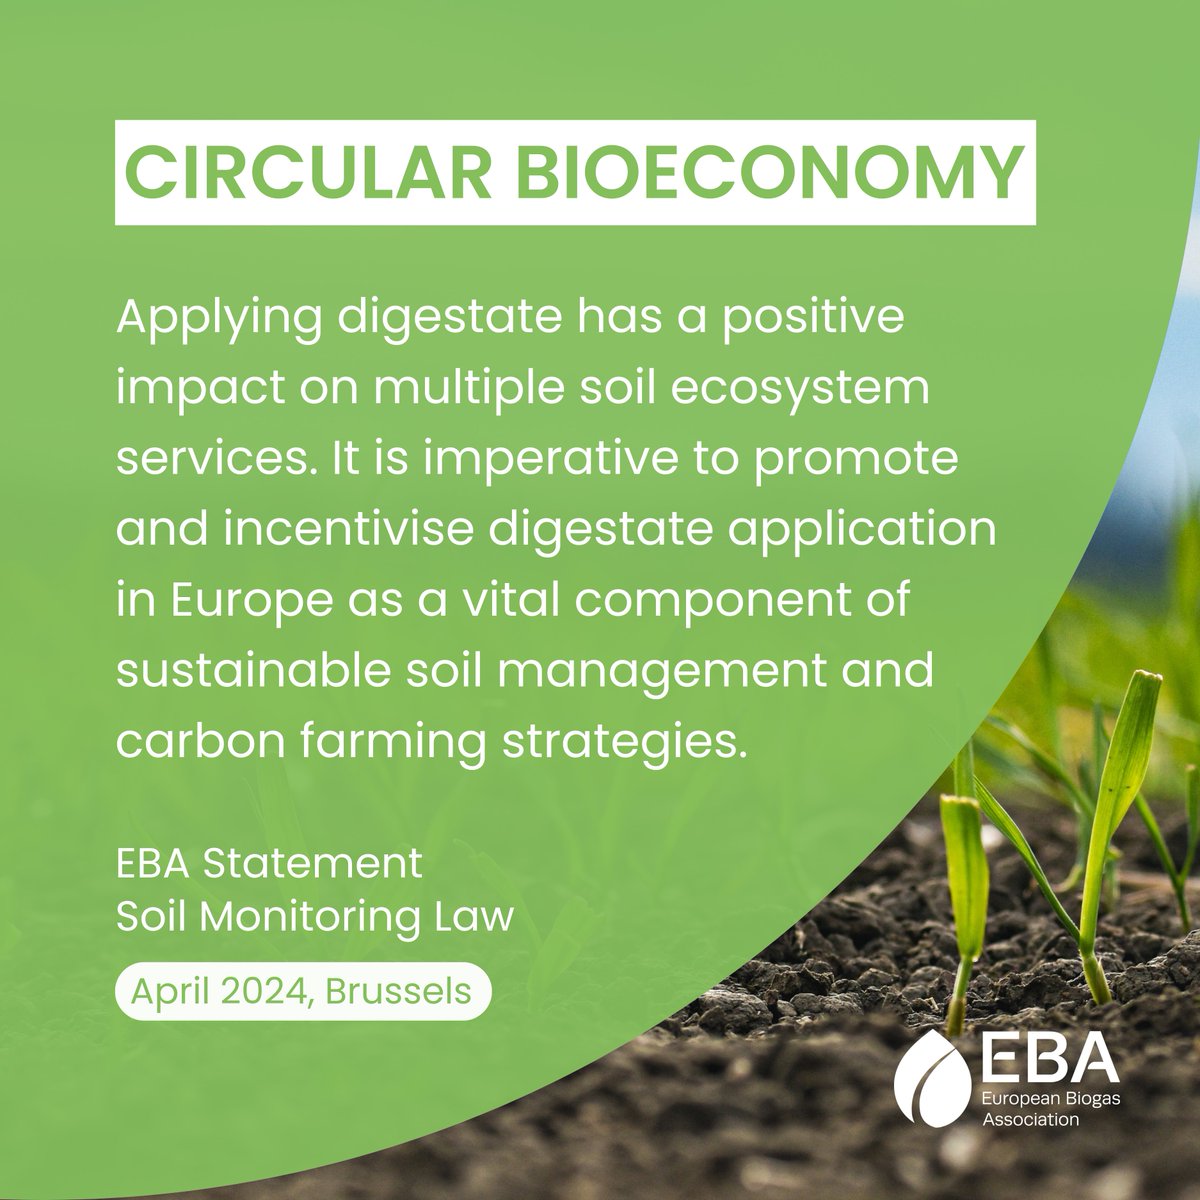 The recent adoption of #SoilMonitoringLaw is a vital step towards protecting and restoring soils in Europe. Soils are crucial for agri-food systems and climate adaptation, areas where #biogas can contribute.
🌱EBA remains committed to advocating for #sustainable #soil management.